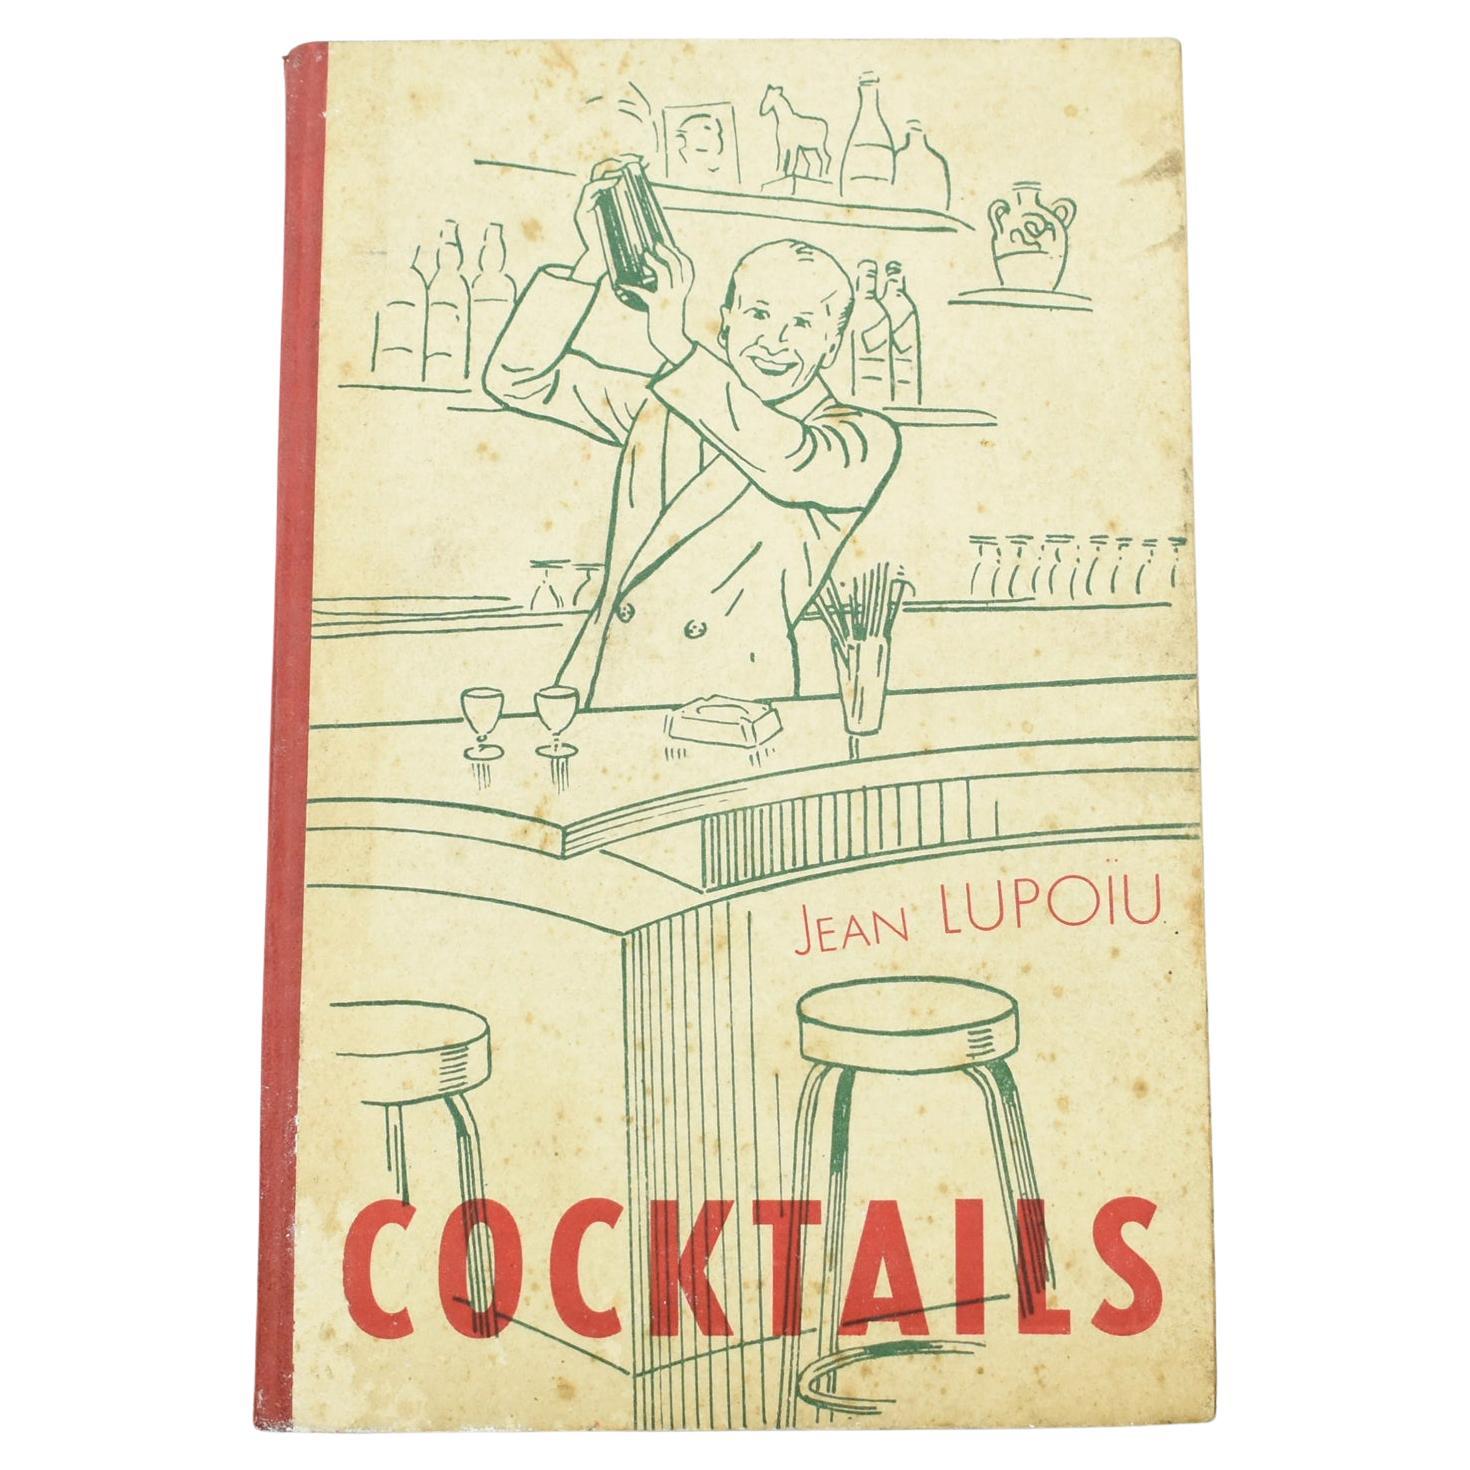 Cocktail Recipes Book by Jean Lupoiu Rare 1948 Edition